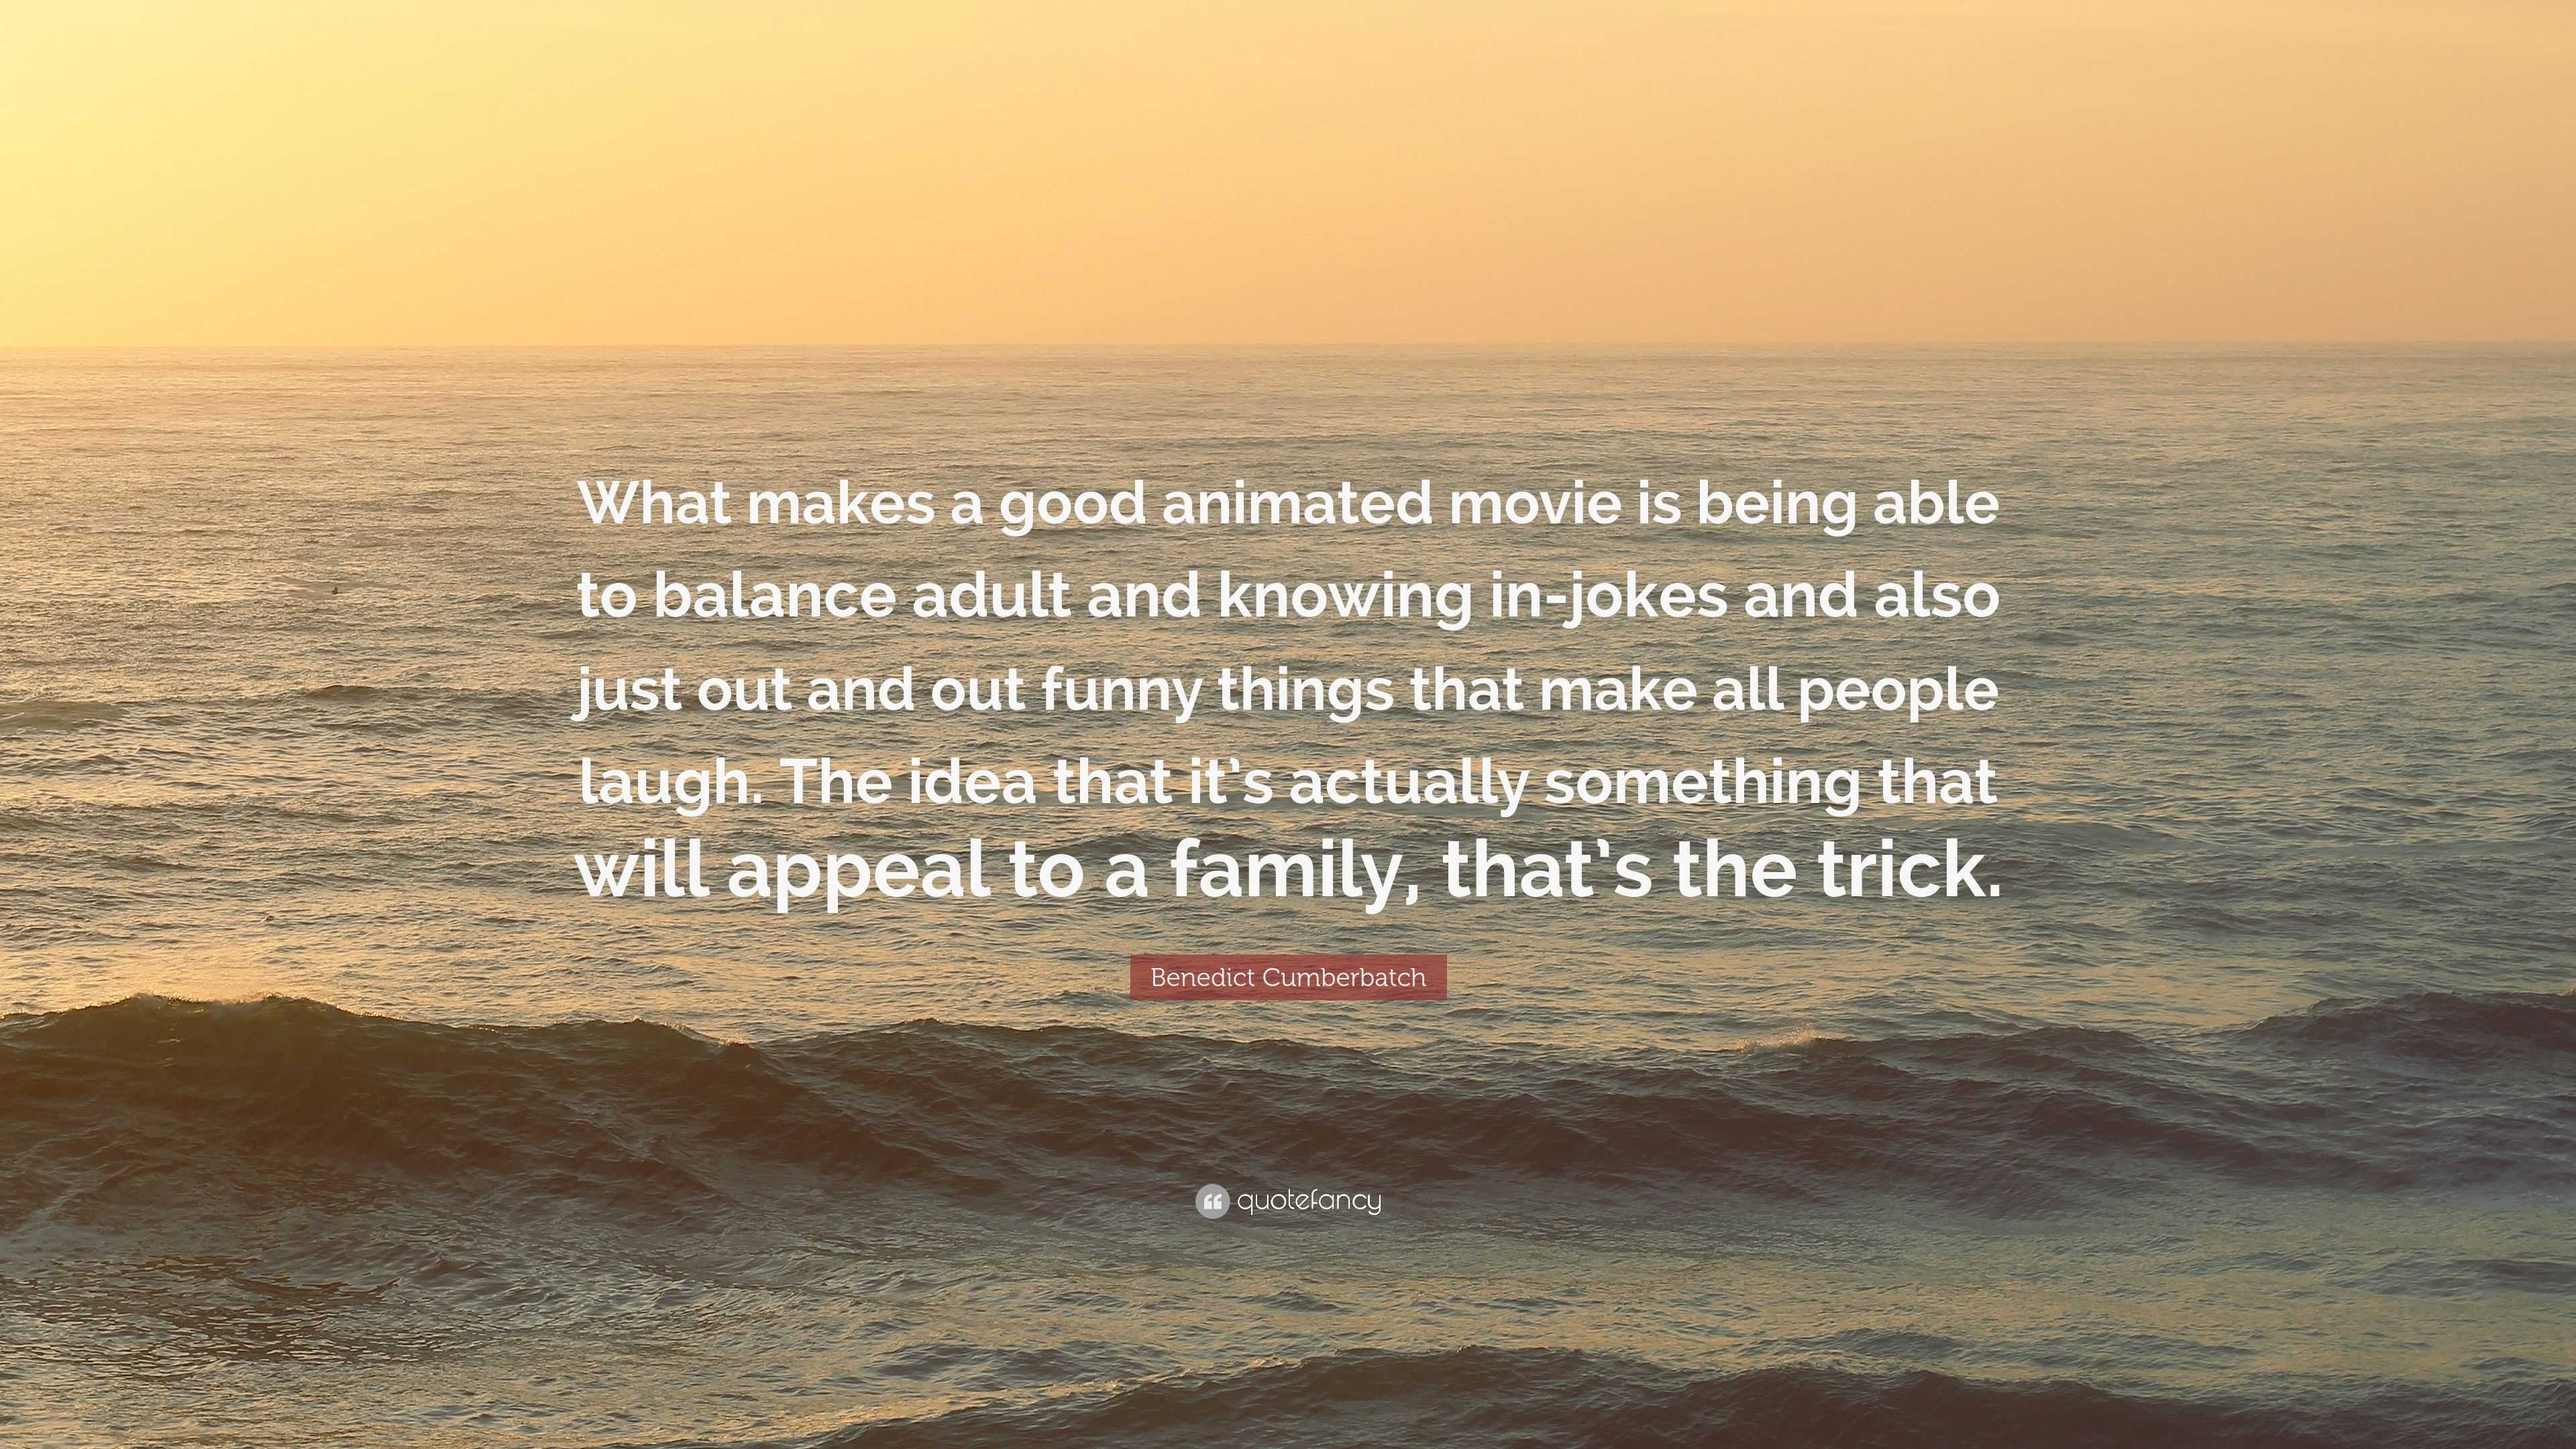 Benedict Cumberbatch Quote: “What makes a good animated movie is being able  to balance adult and knowing in-jokes and also just out and out funny  thi...”